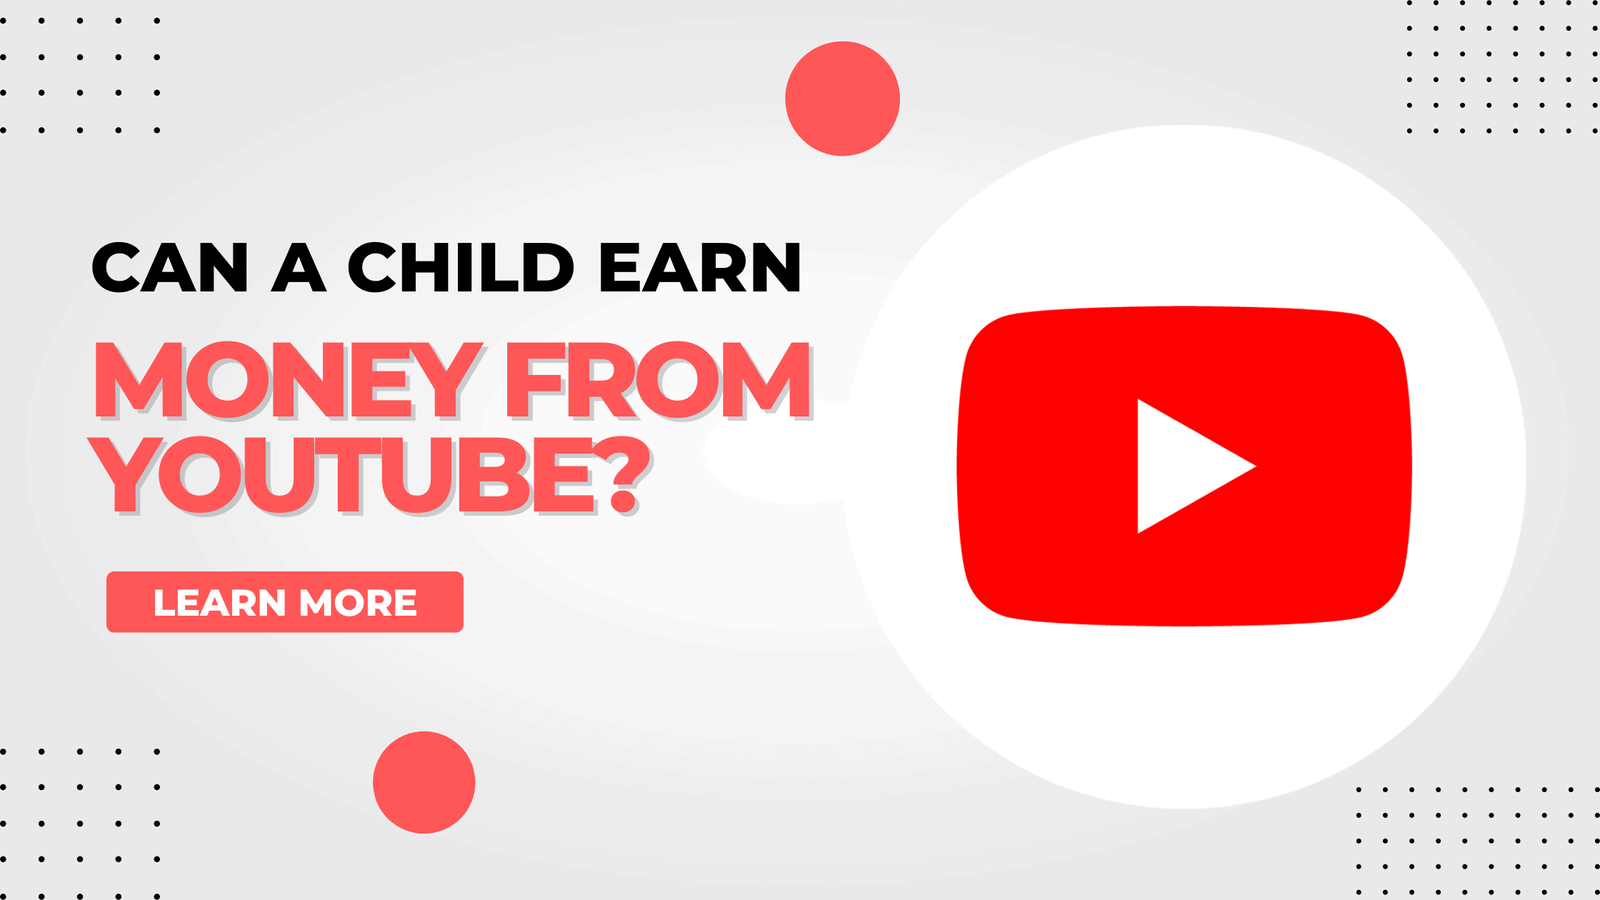 Can a Child Earn Money from YouTube?